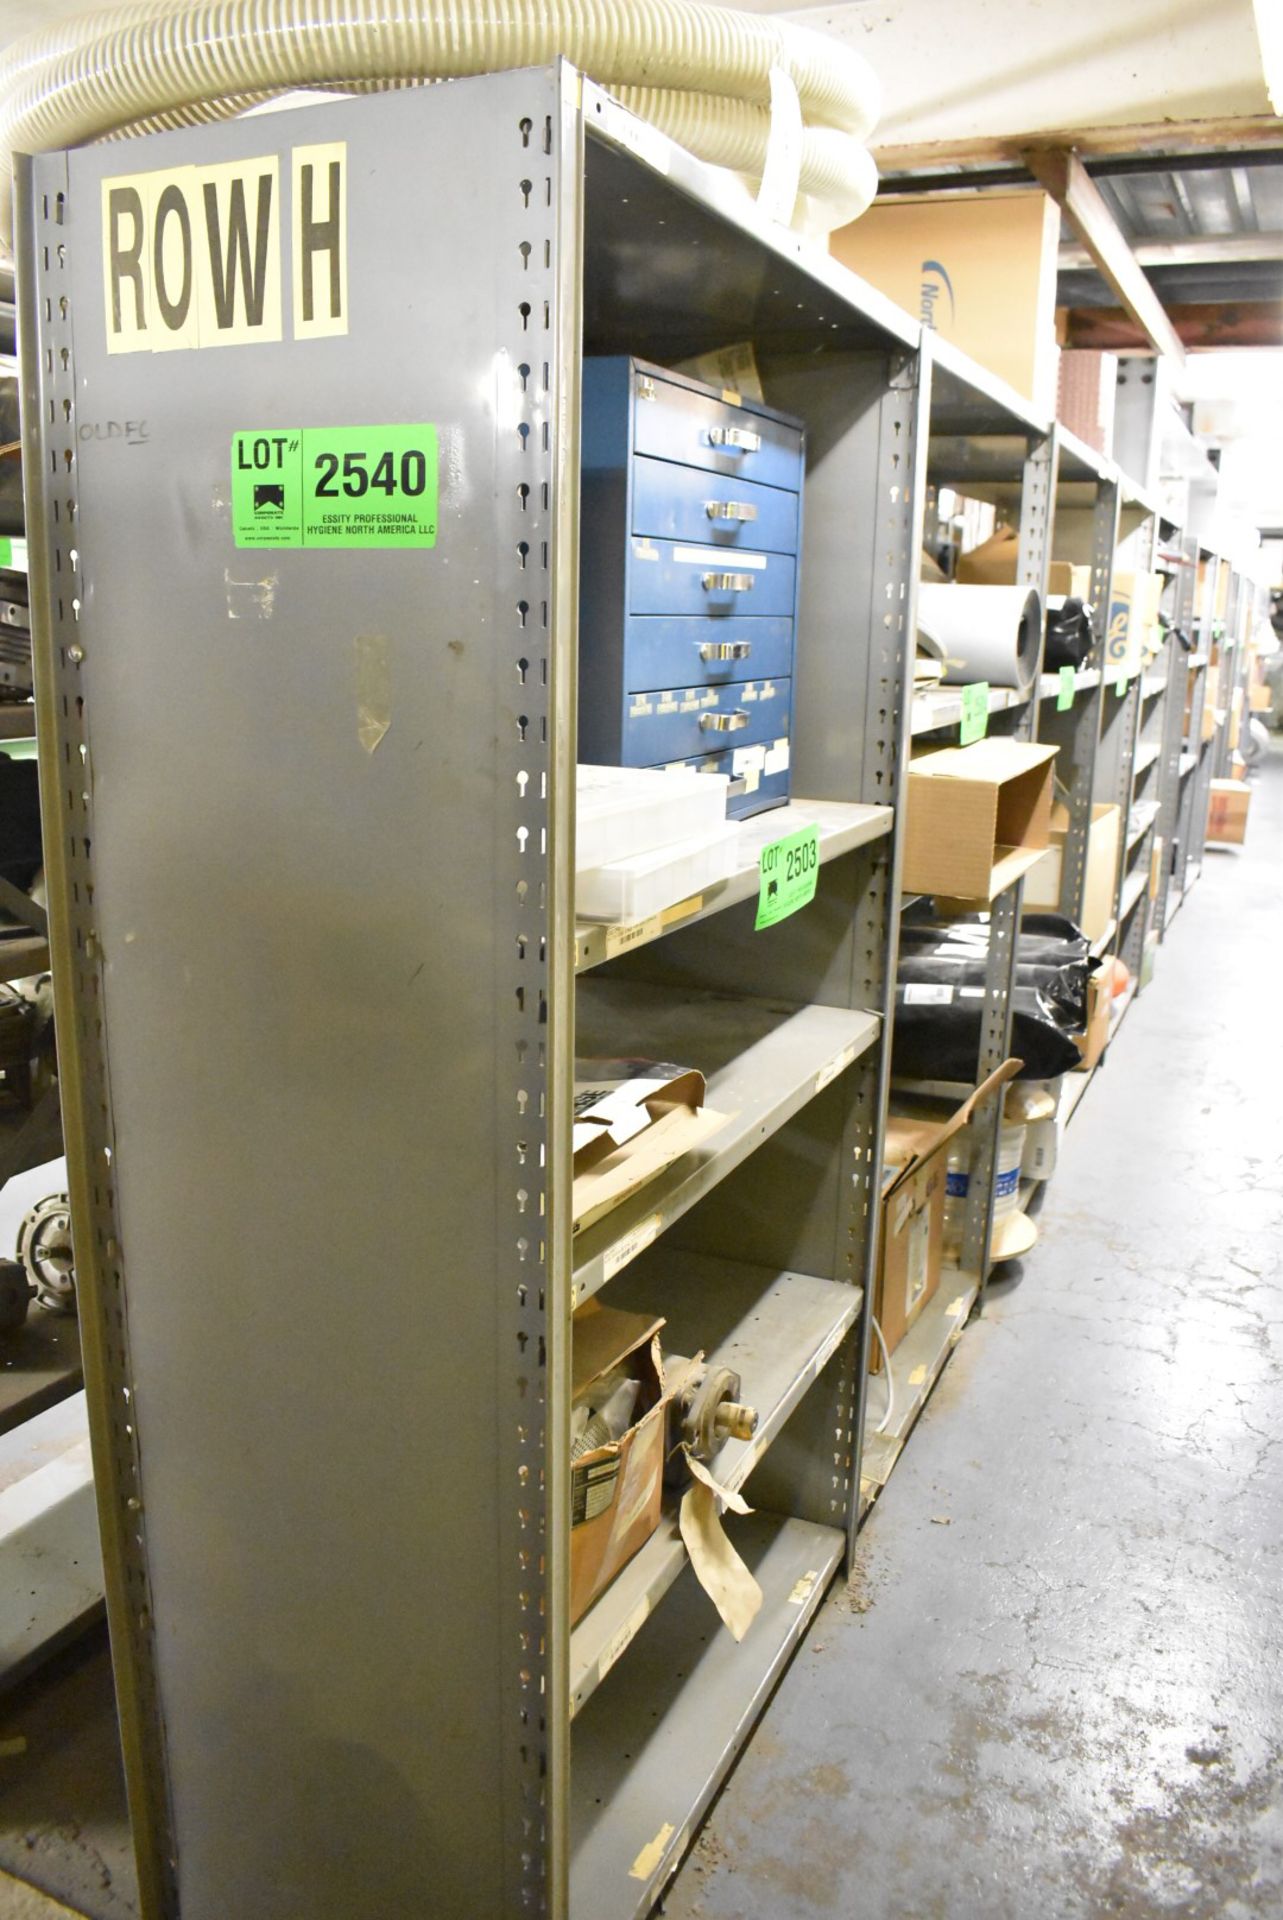 LOT/ (15) SECTIONS OF ADJUSTABLE STEEL SHELVING (DELAYED DELIVERY) [RIGGING FEES FOR LOT #2540 - $